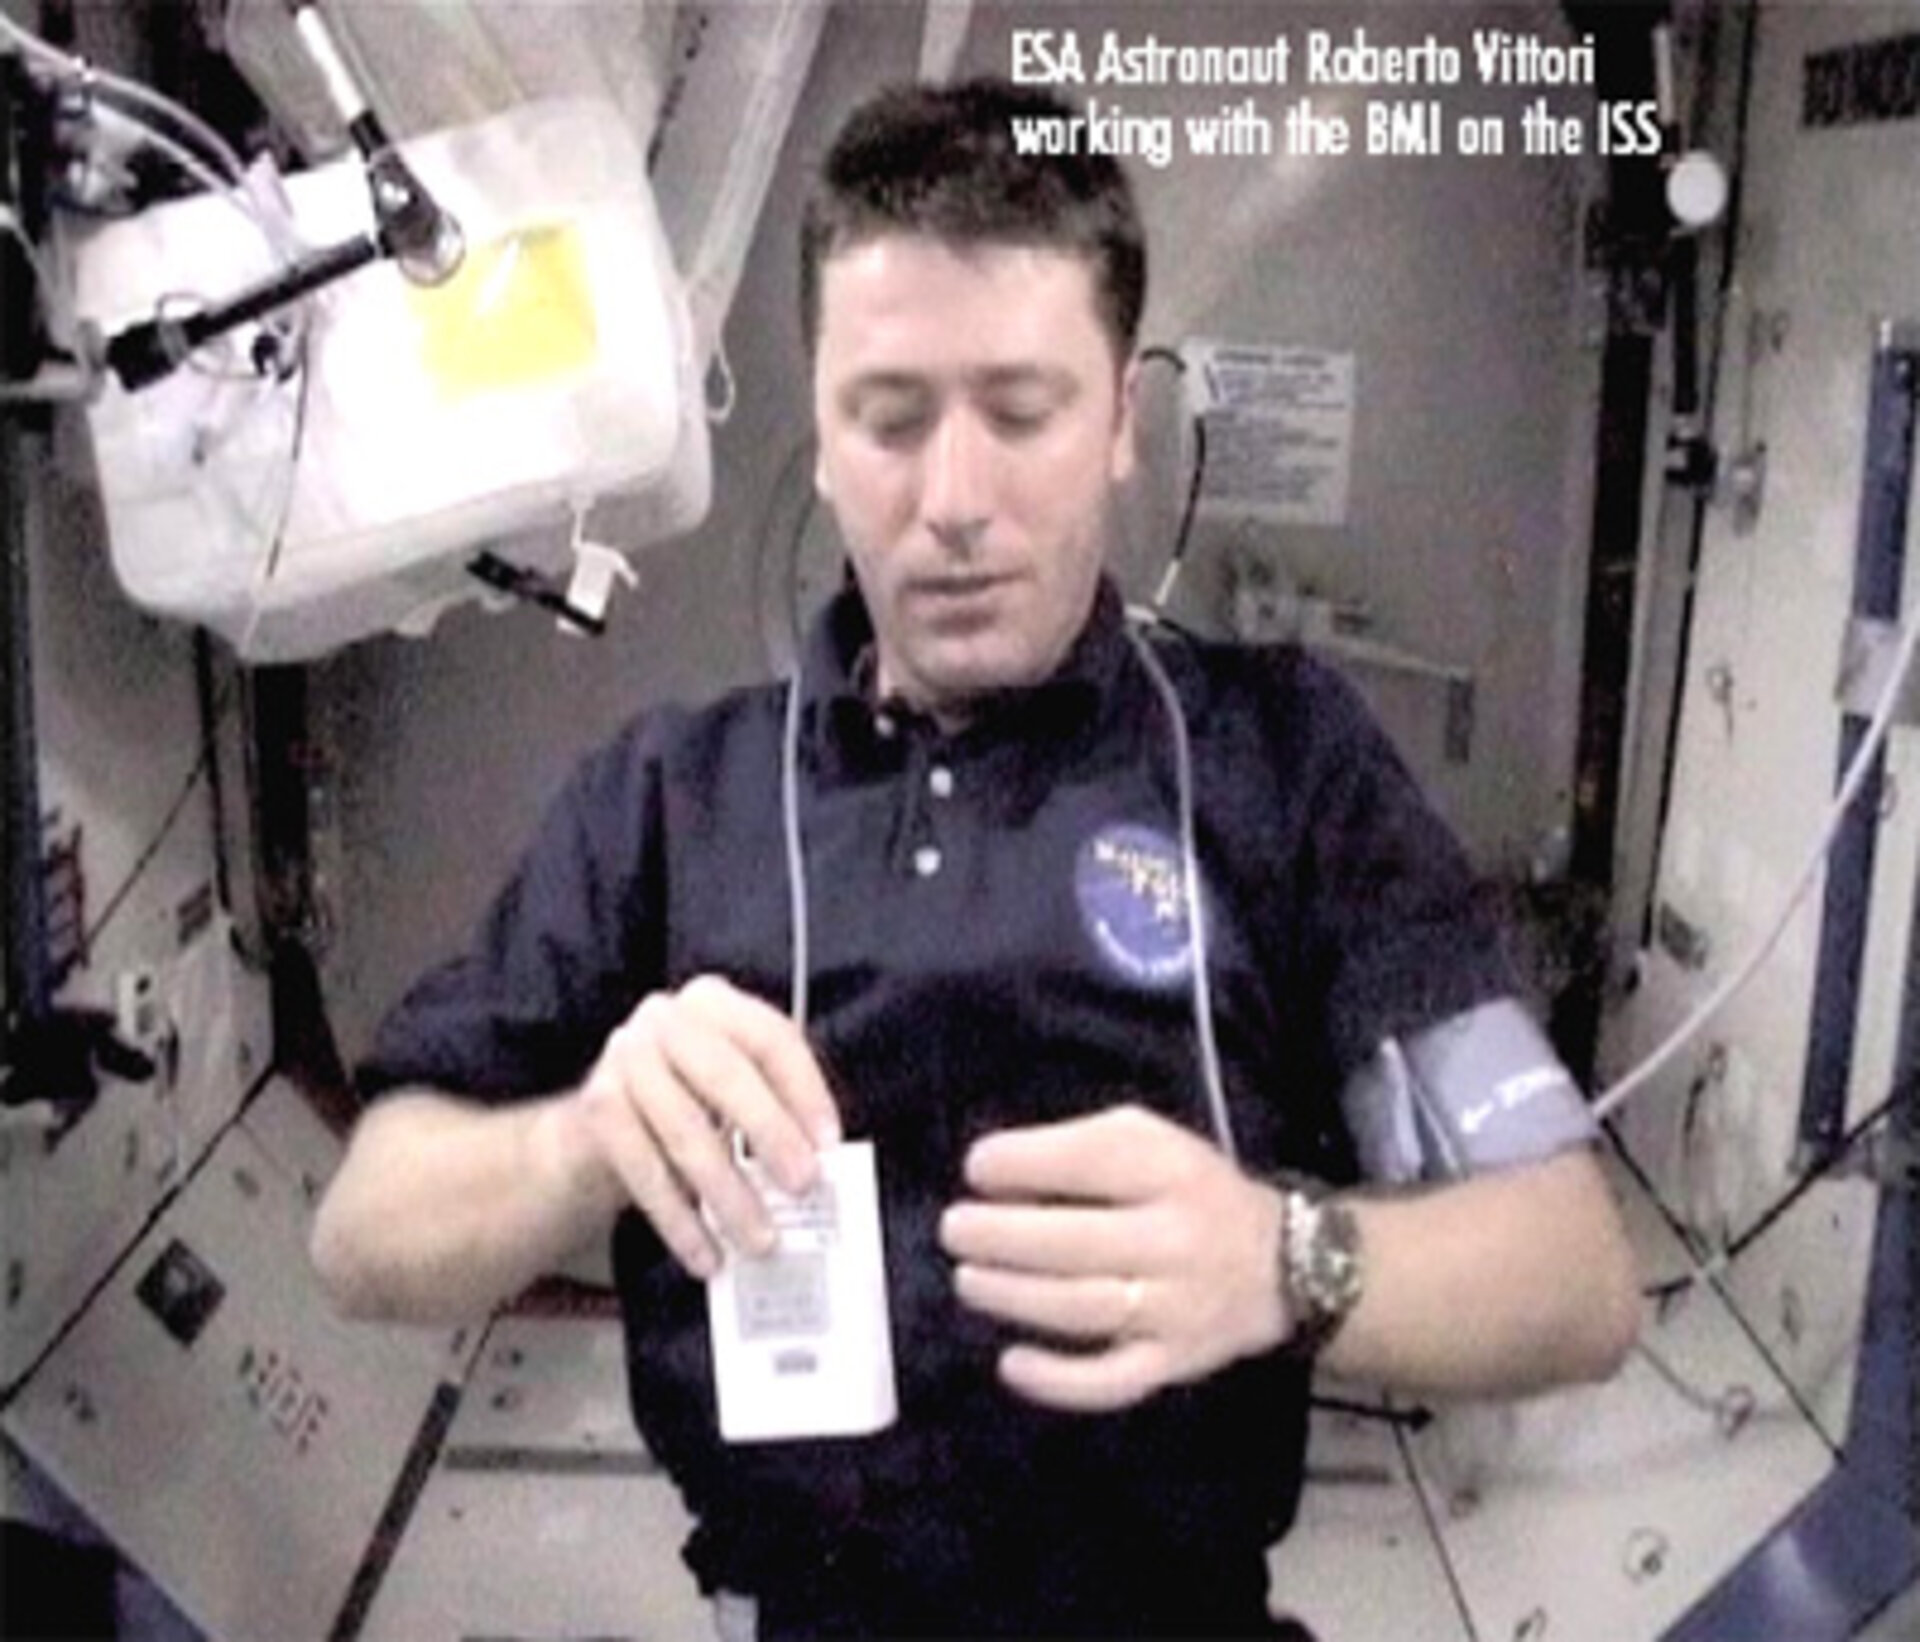 ESA astronaut Roberto Vittori working with the BMI on the ISS